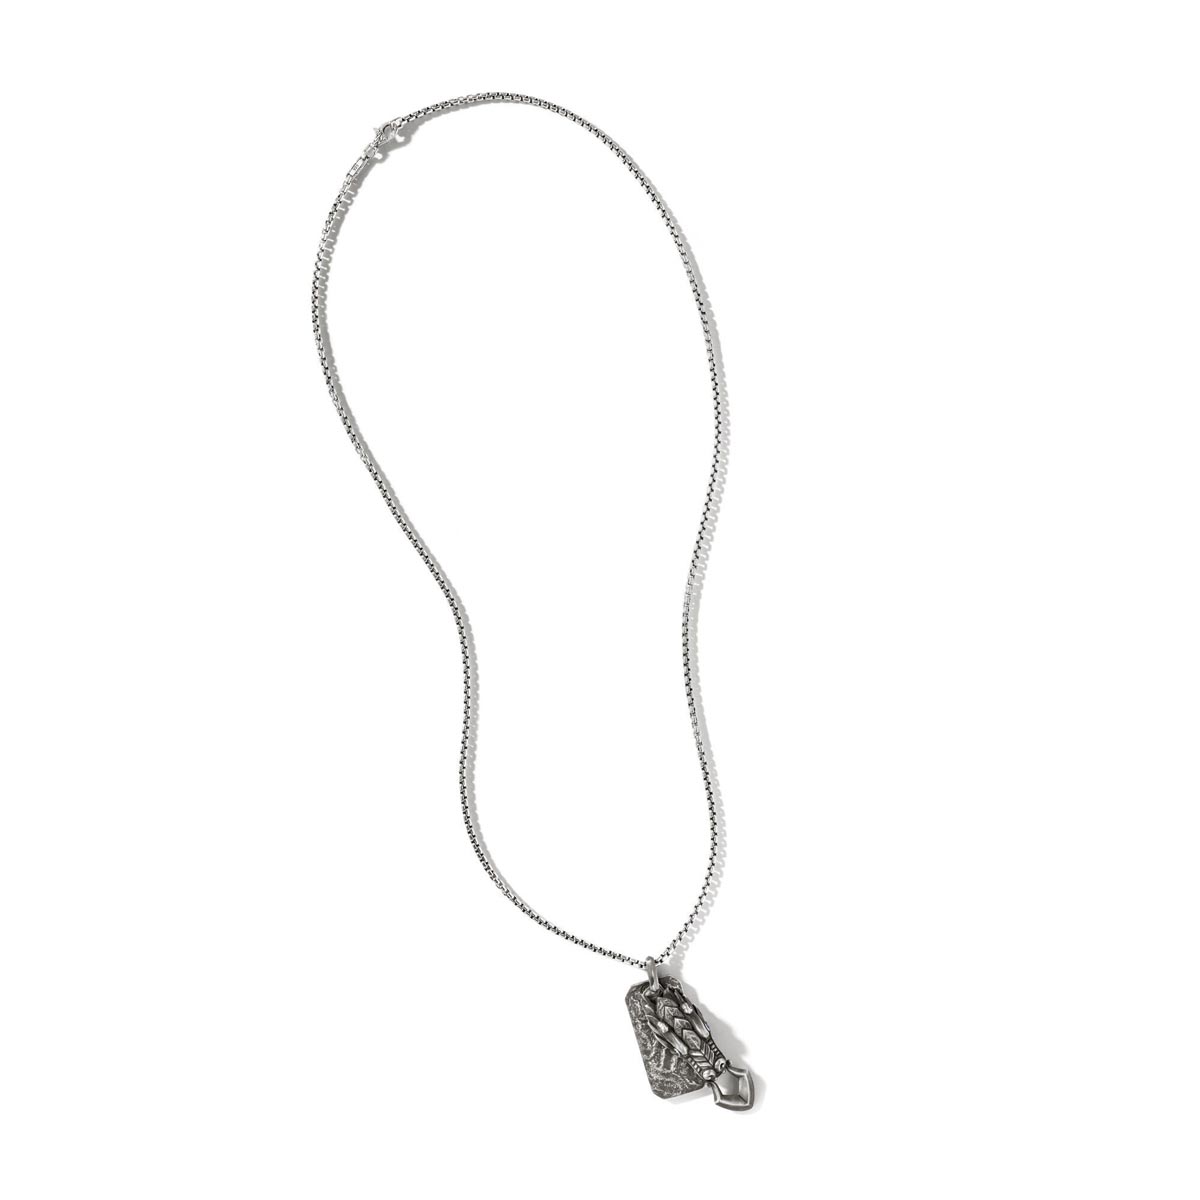 John Hardy Legends Naga Collection Sapphire Necklace in Sterling Silver